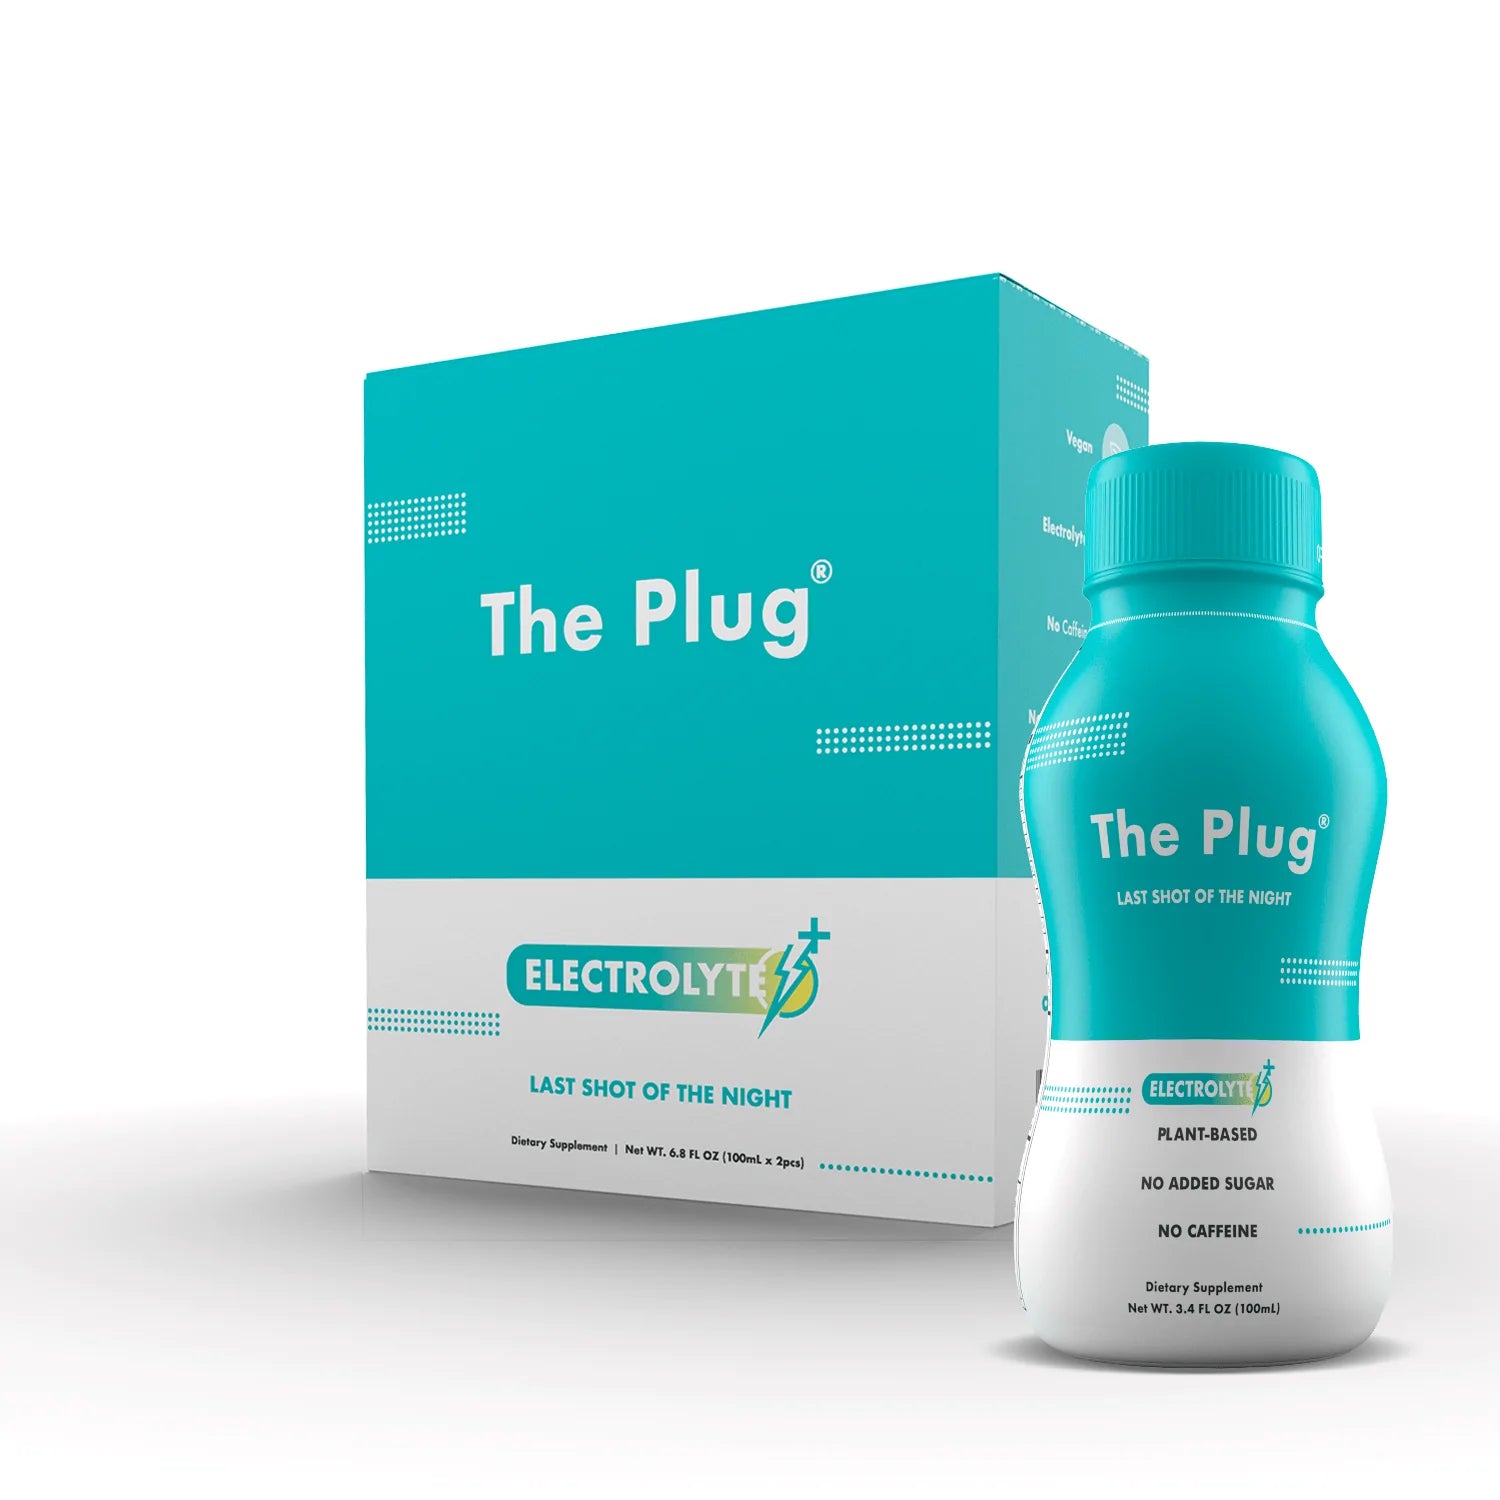  The Plug Liver Drink Plant-based by The Plug Drink The Plug Drink Perfumarie